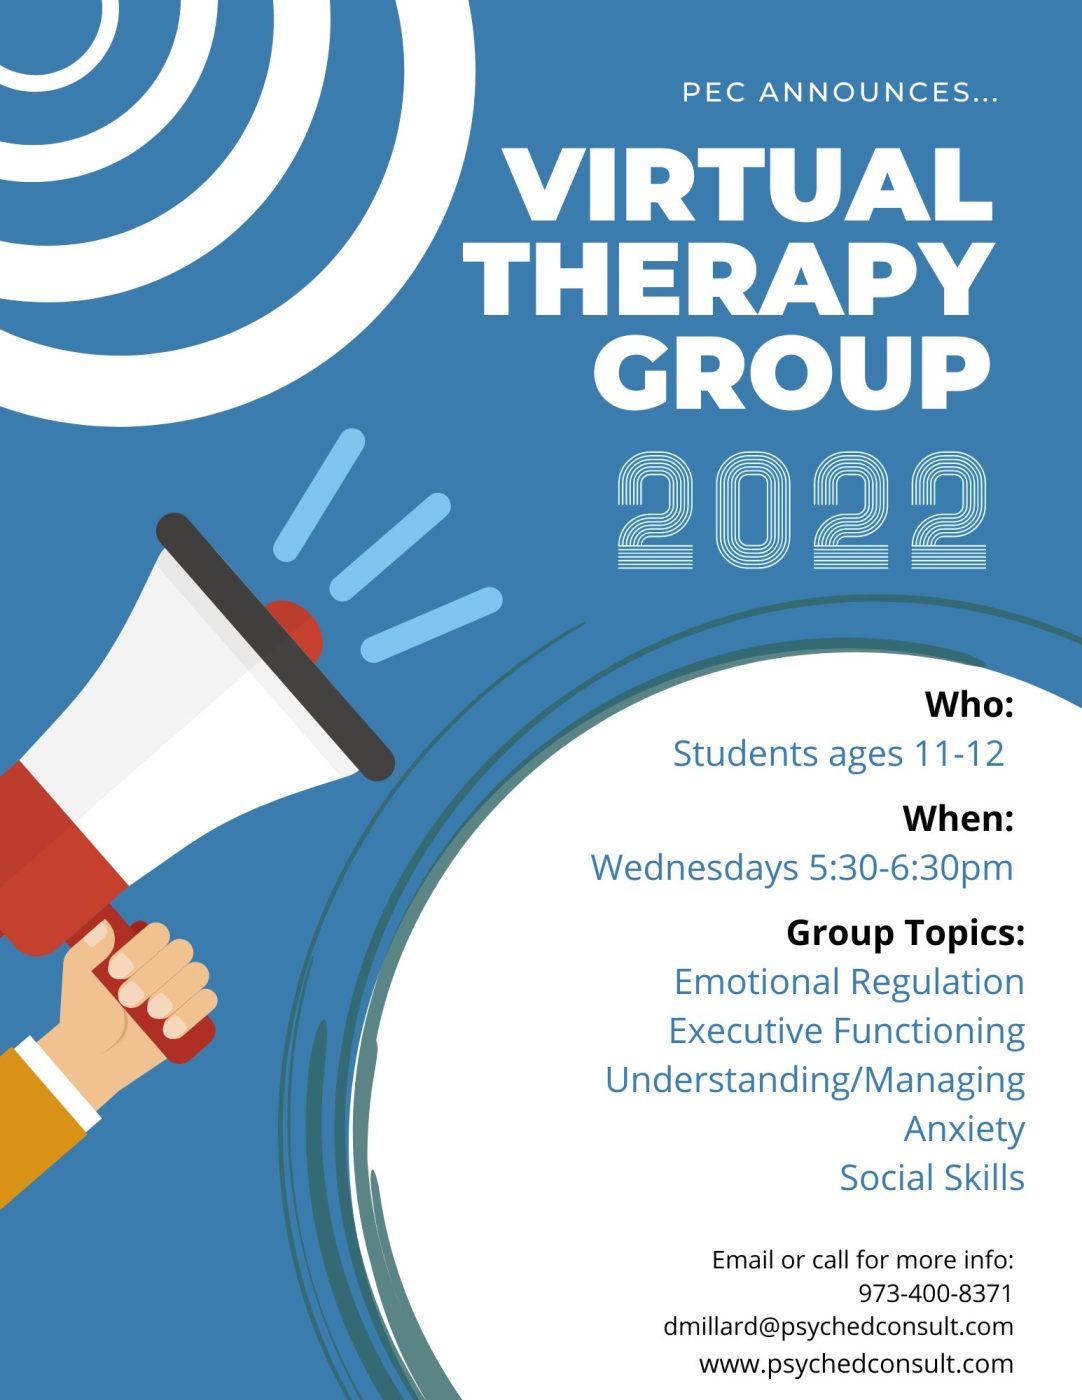 PEC Announces Virtual Group Therapy!! pic